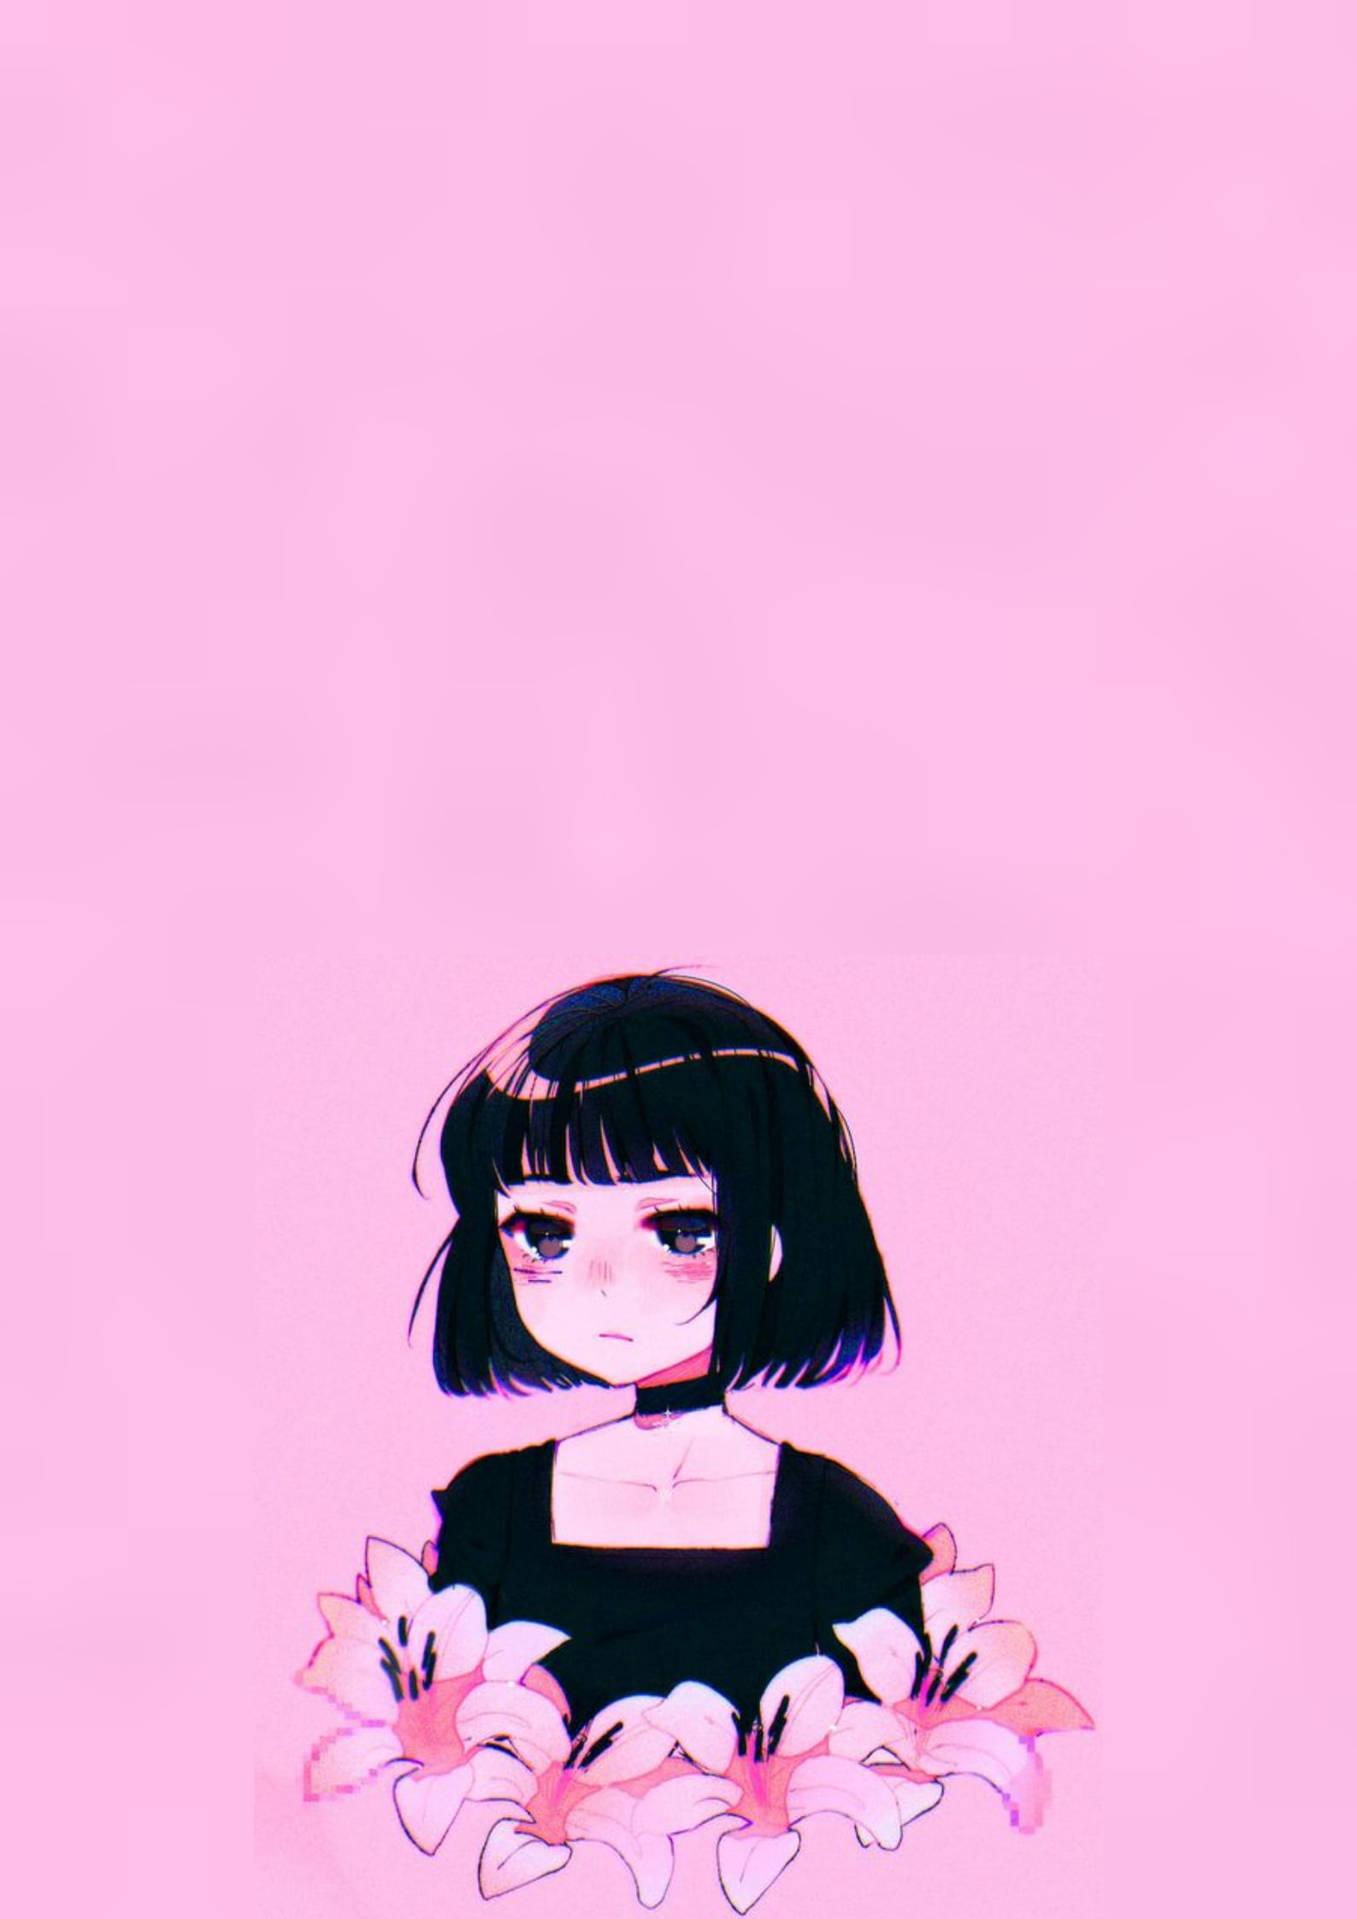 Aesthetic Pink Anime Goth Girl With Ebony Hair Wallpaper